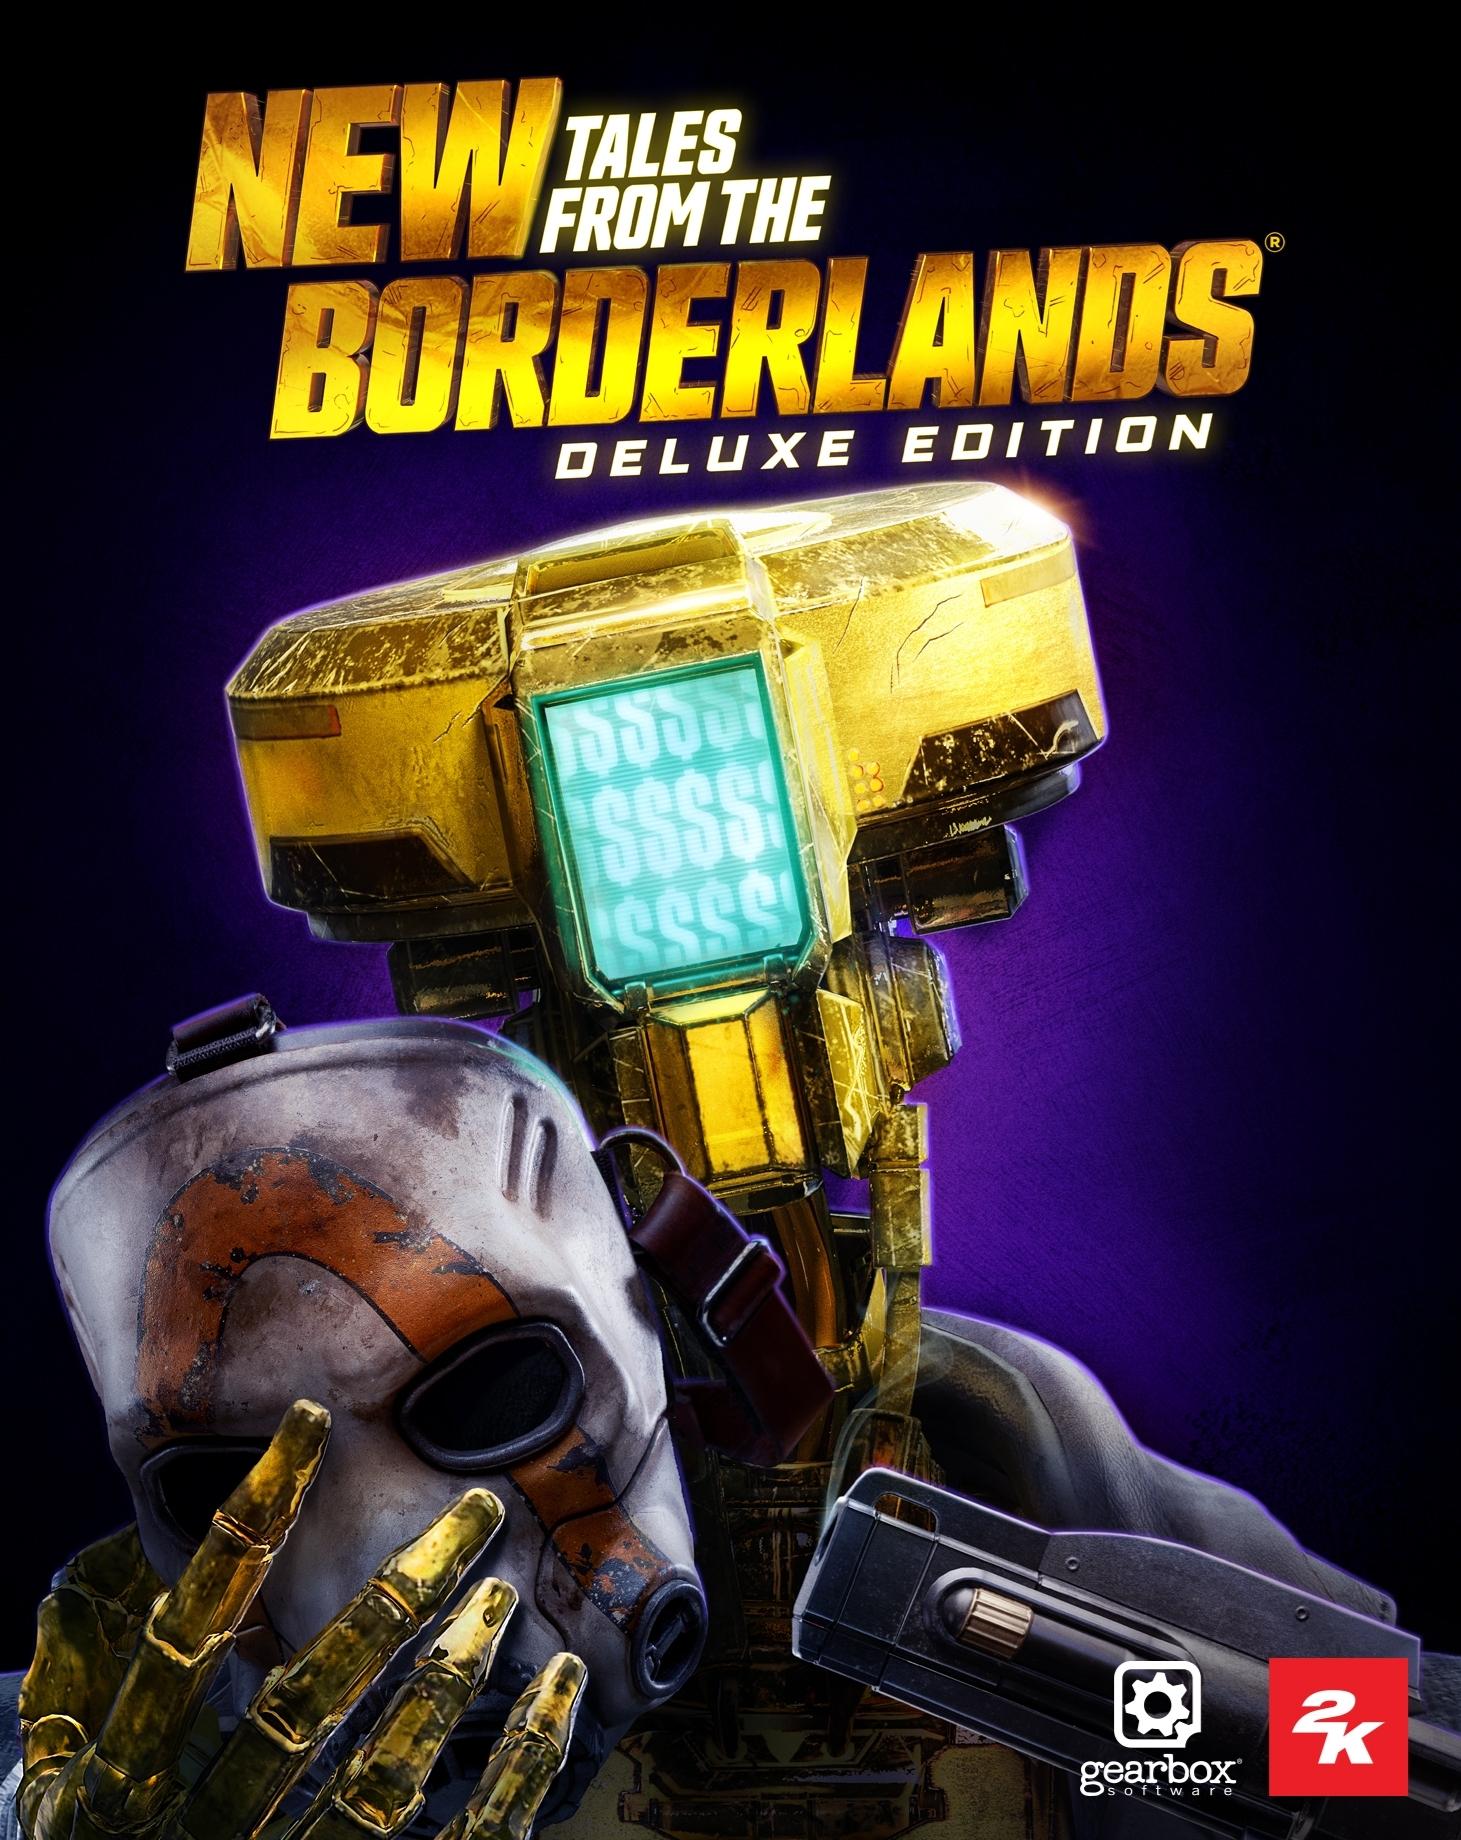 New Tales from the Borderlands: Deluxe Edition (Steam) - Pre Order | ROW (8781b298-c317-4f95-bac2-4f2d16602876)